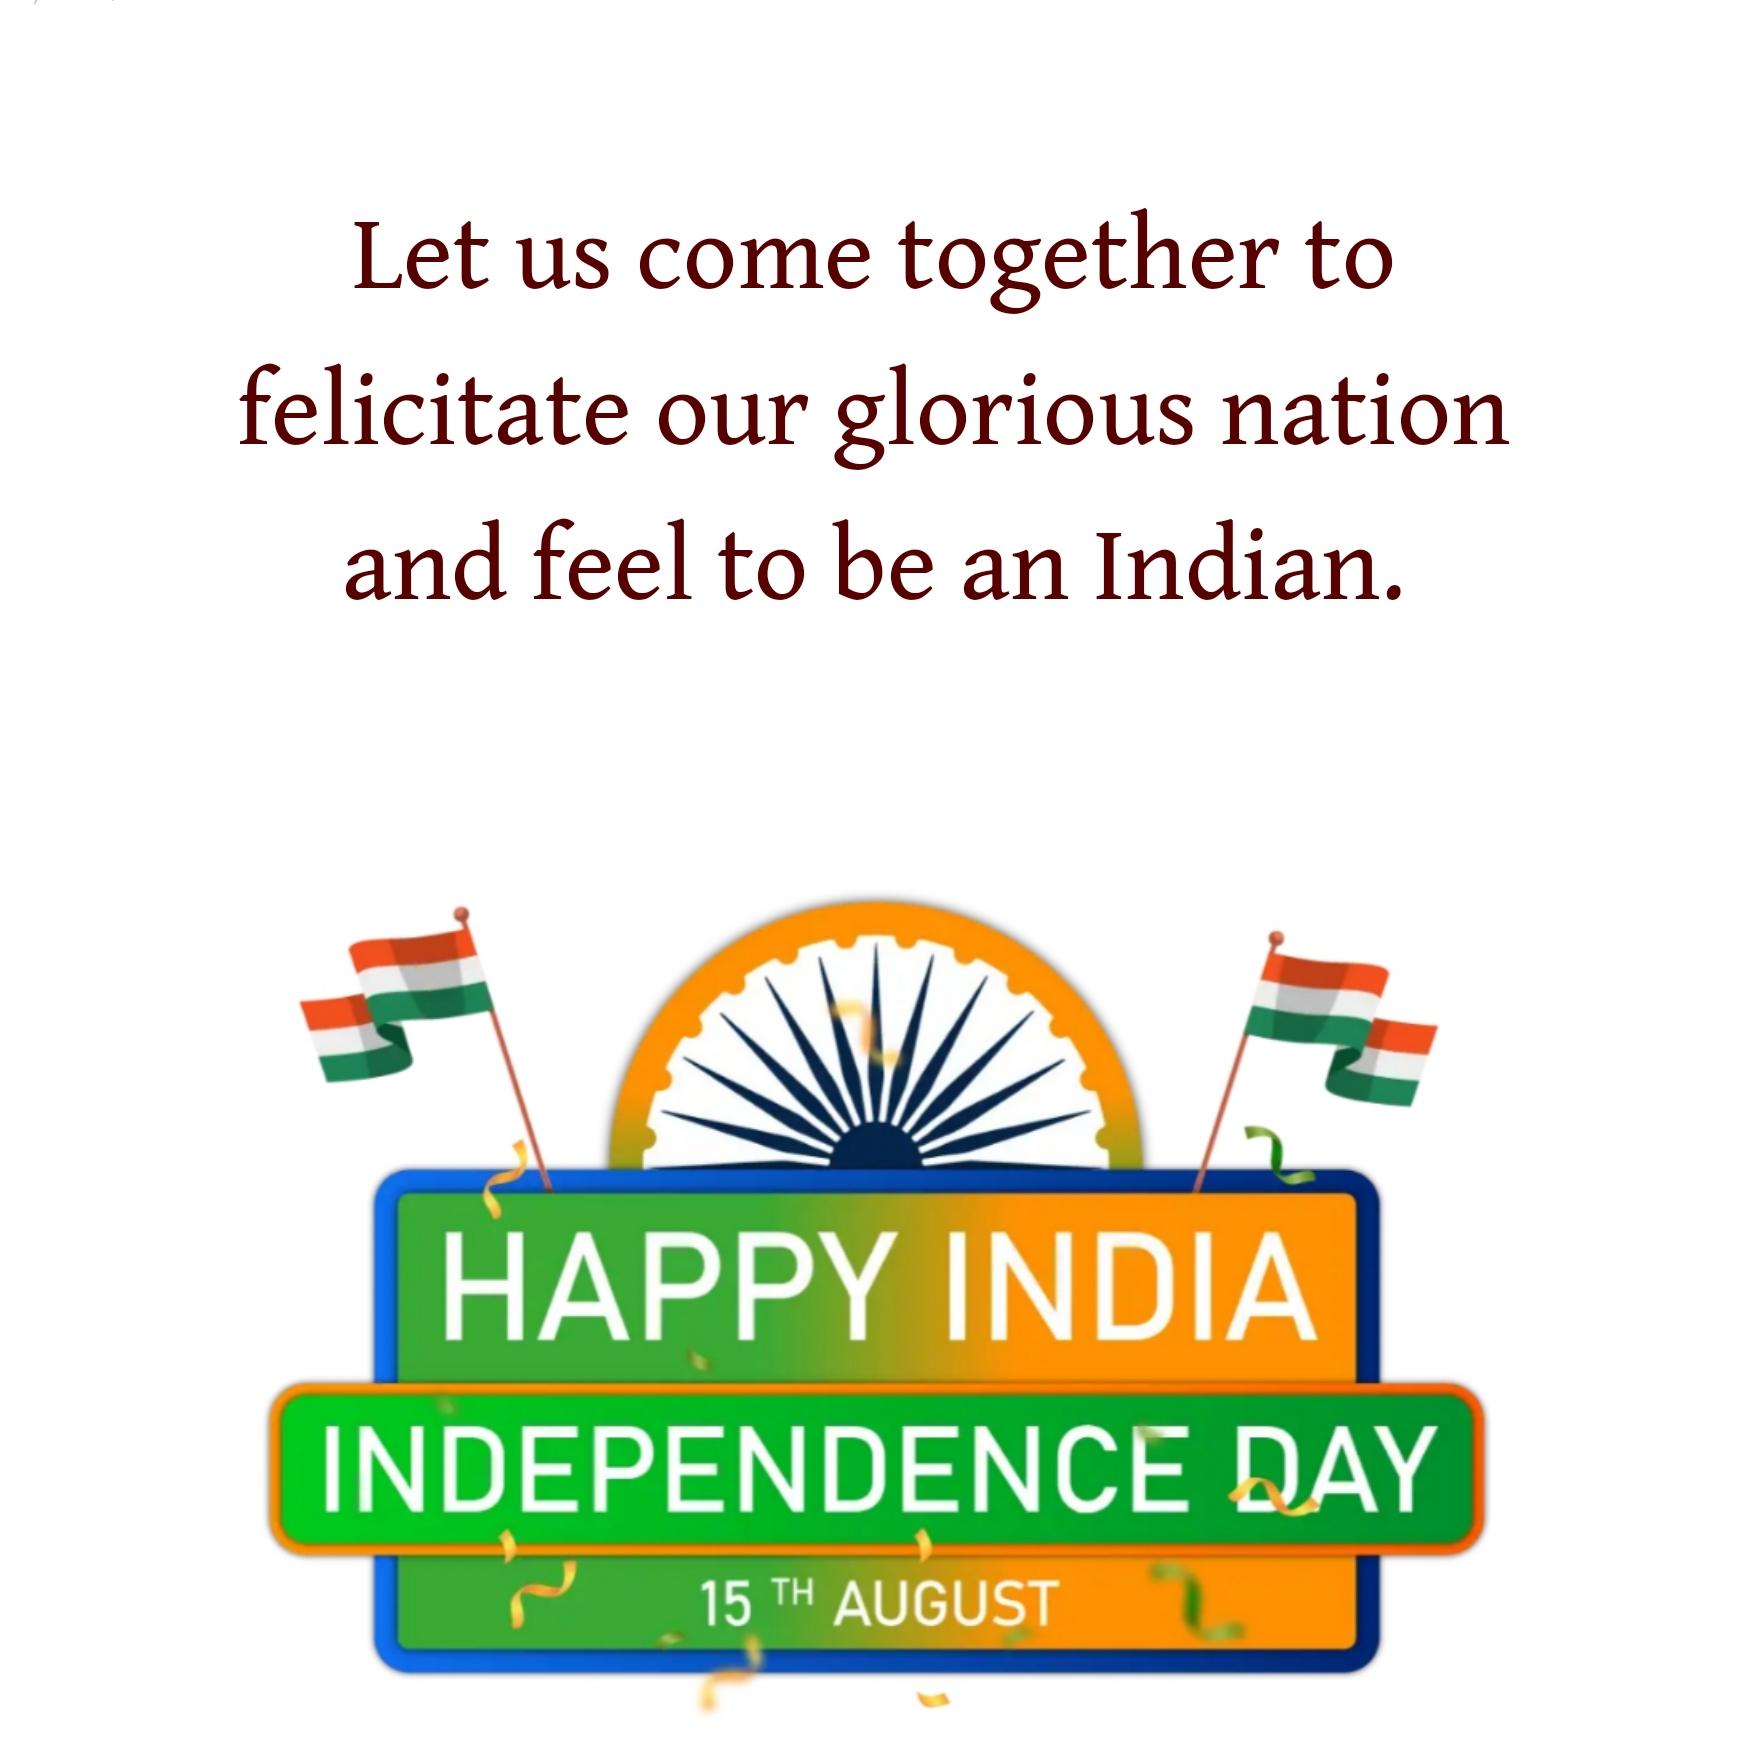 Let us come together to felicitate our glorious nation